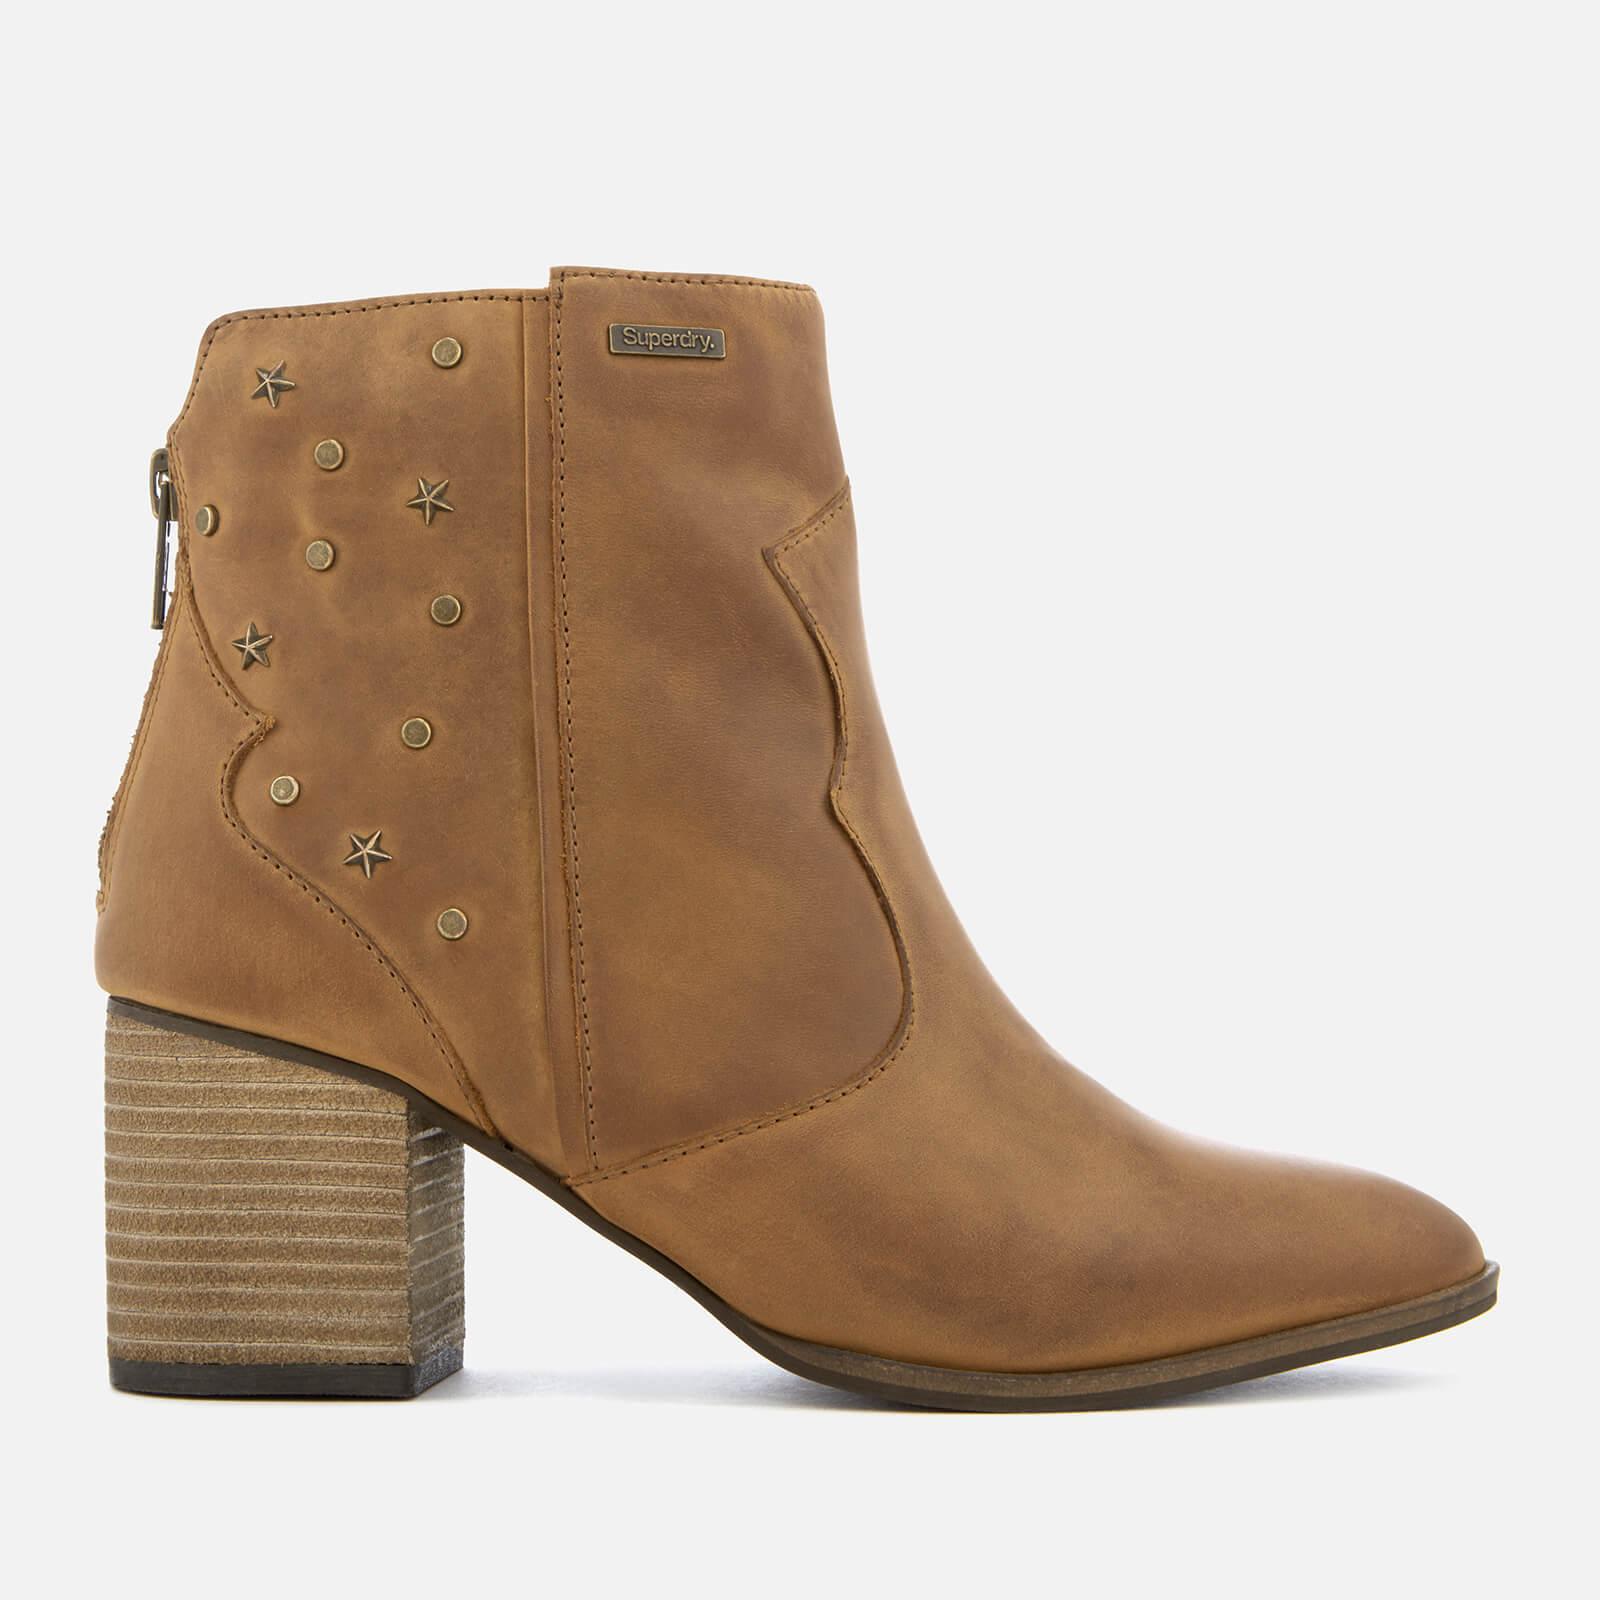 Superdry Leather Miley Ankle Boots in Tan (Brown) - Lyst